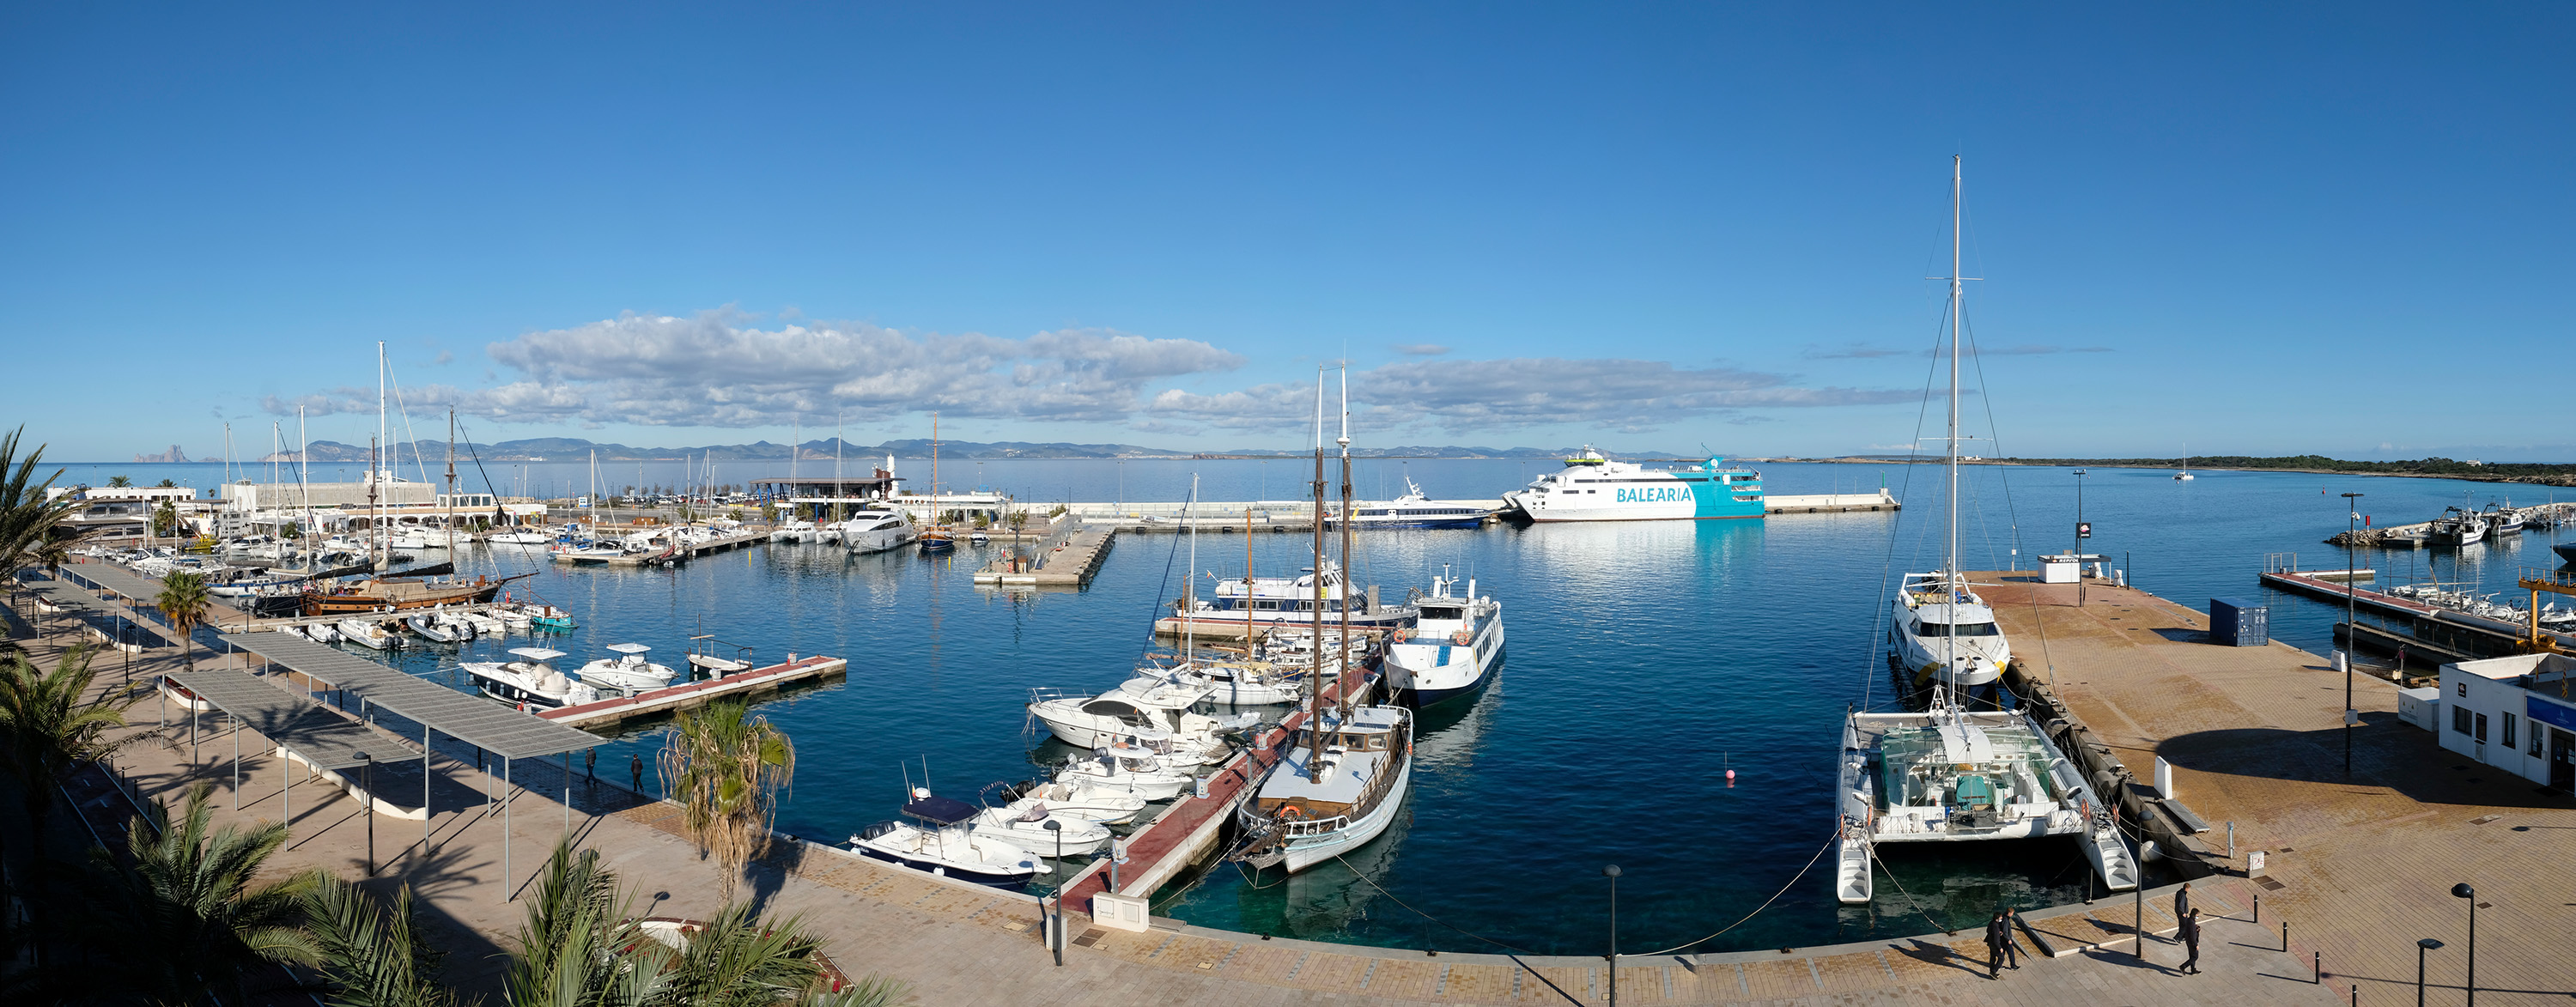 The APB will occupy the Levante sub-basin of the port of La Savina and will use it for the operation of excursion boats